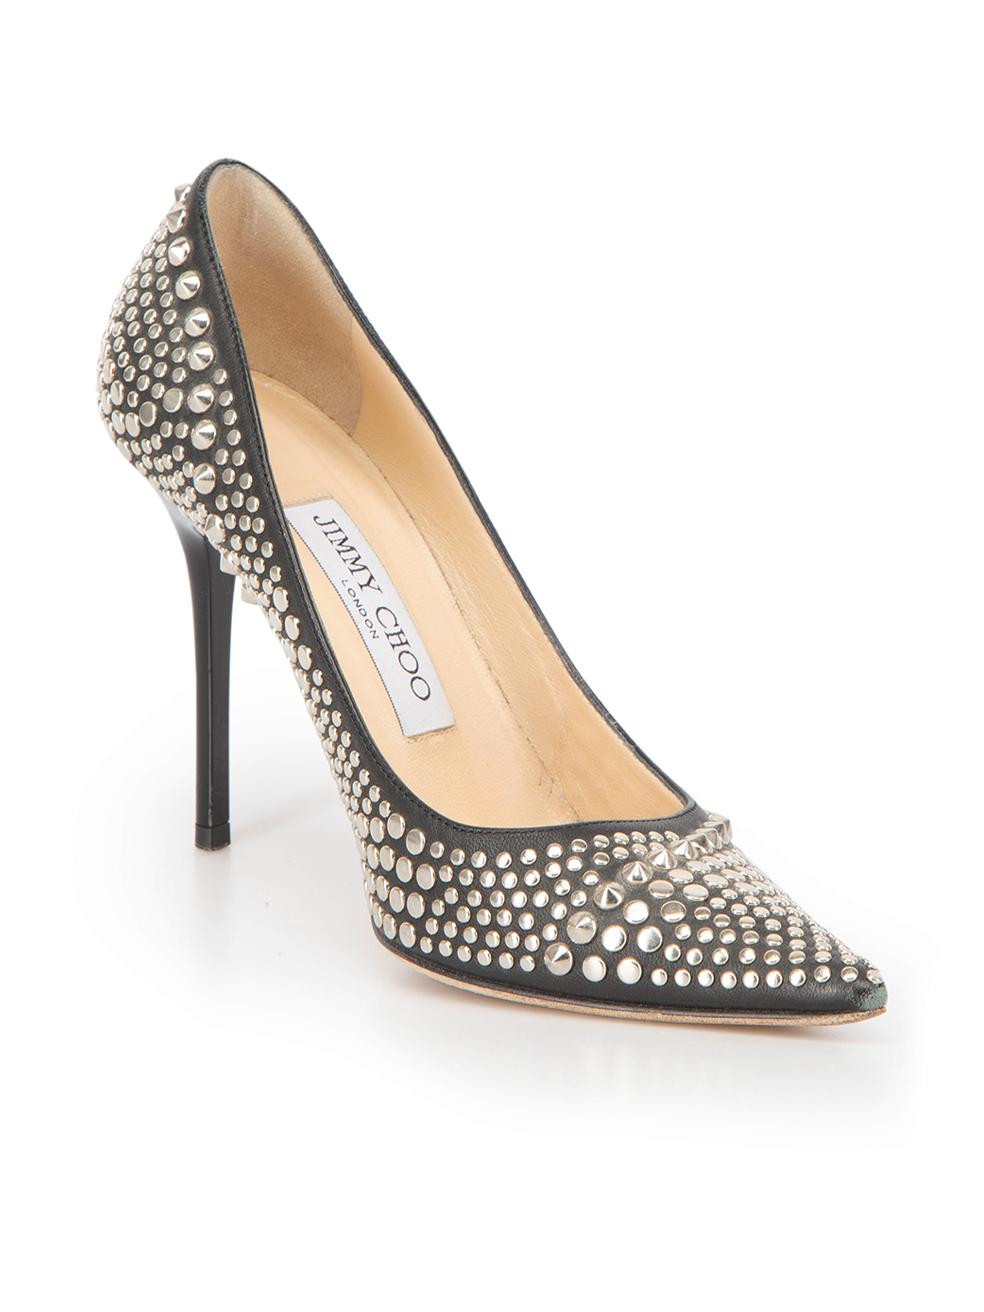 CONDITION is Very good. Minimal wear to pumps is evident. Minimal wear to the silver studs and the outsole on this used Jimmy Choo designer resale item.
 
 Details
  Black
 Leather
 High pumps
 Point-toe
 Silver tone studs
 Slip on
 Stiletto   
 
